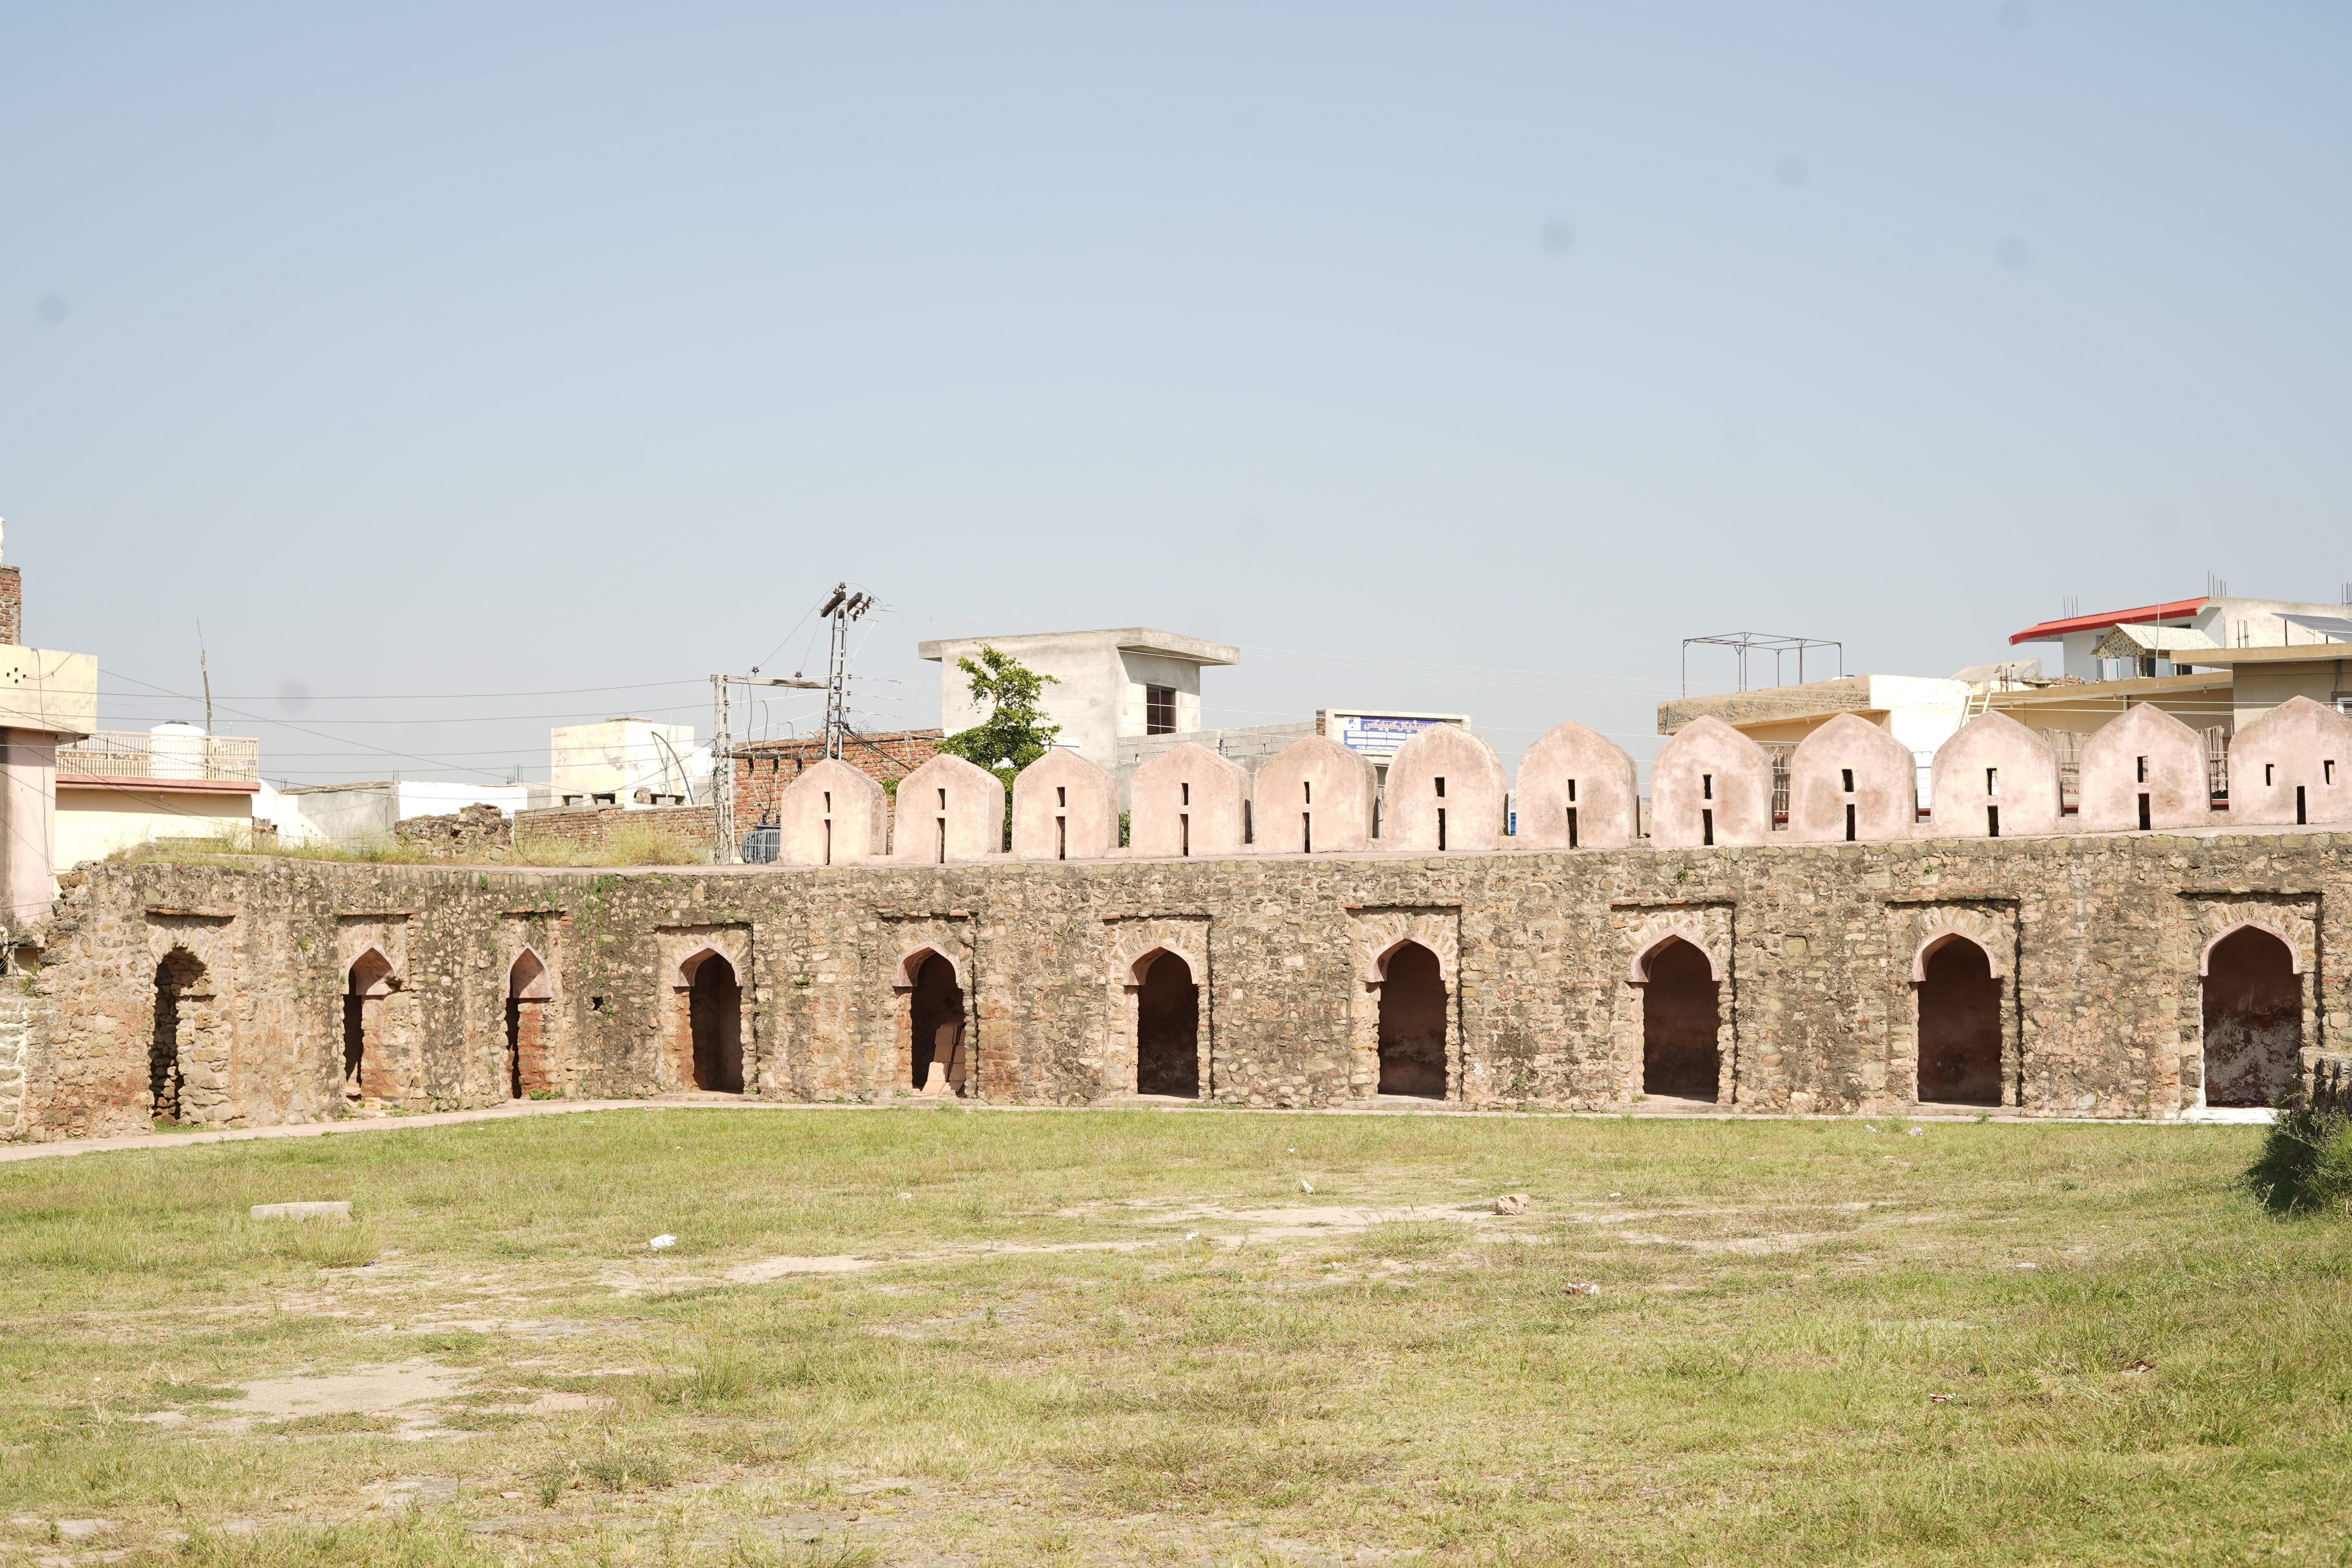 The demolished wall of Rawat Fort after reconstruction